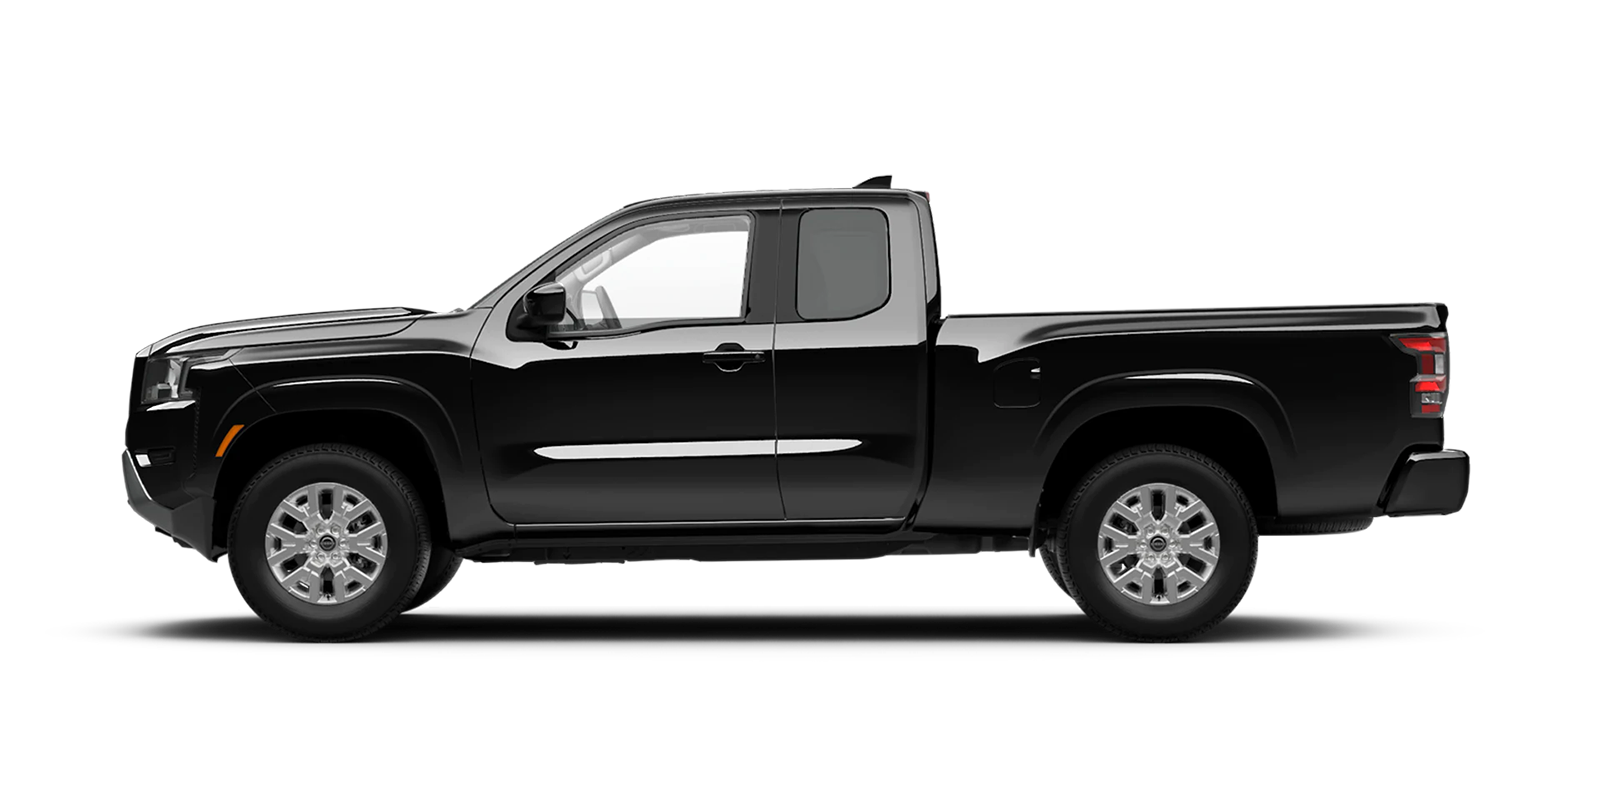 2022 Frontier King Cab SV 4x4 in Super Black | San Leandro Nissan in San Leandro CA